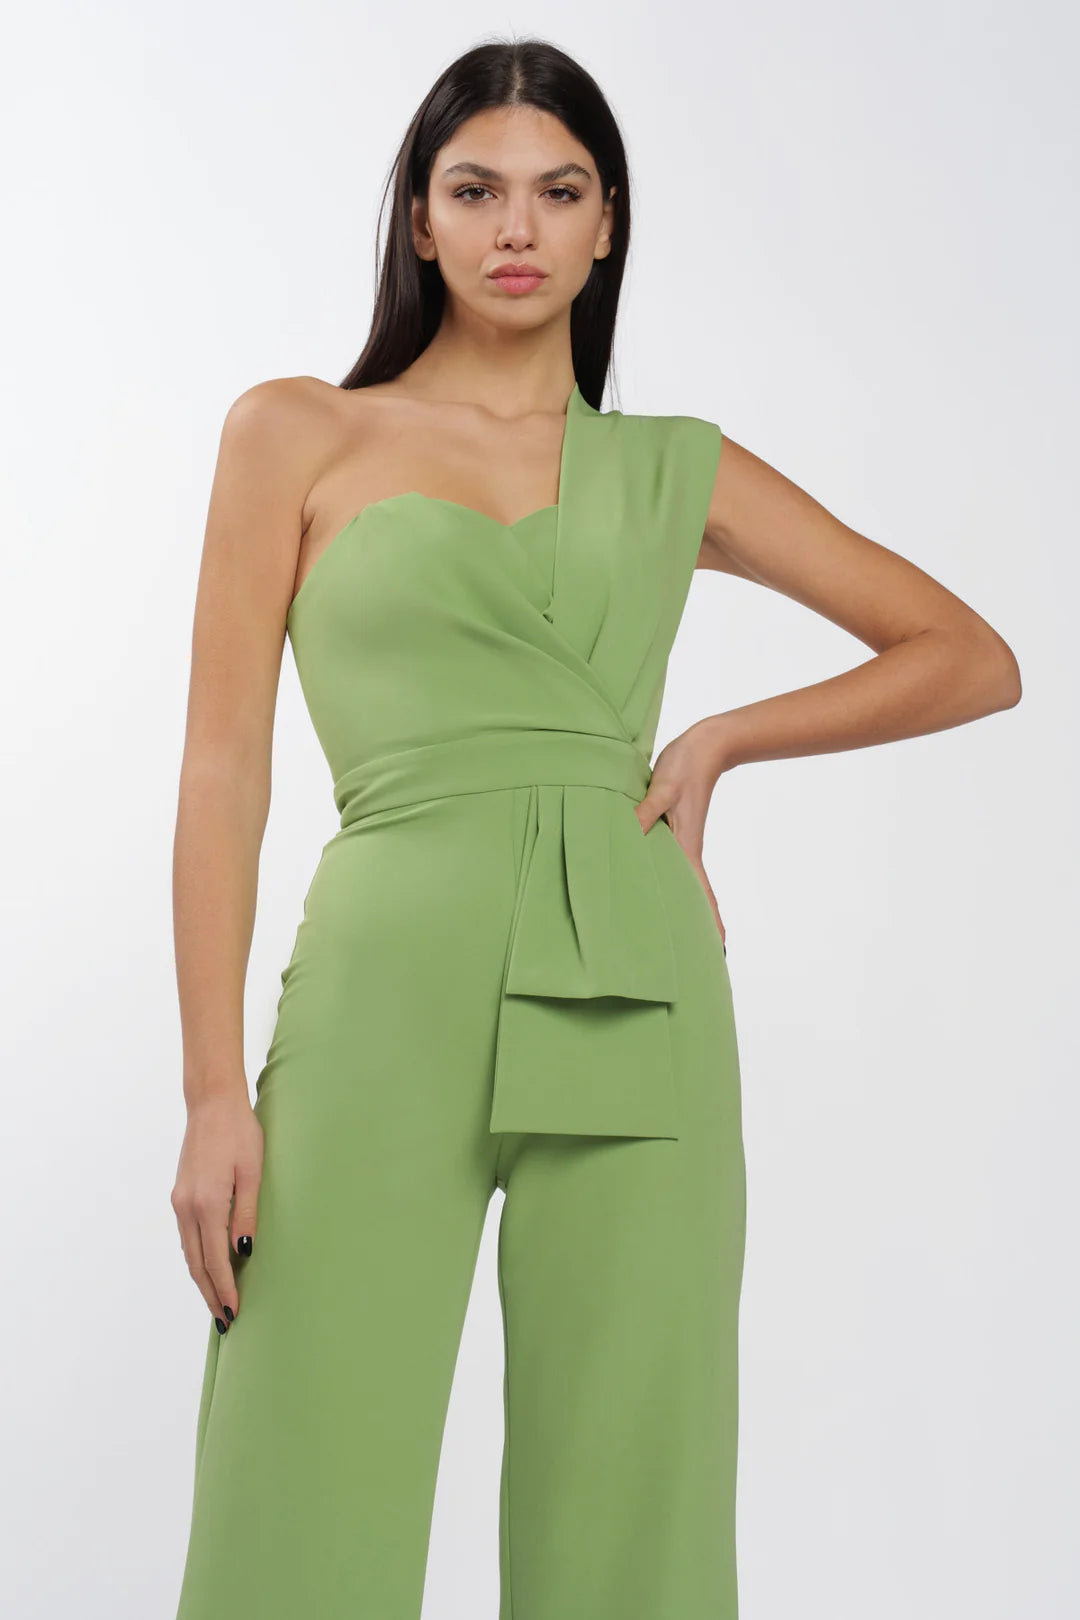 Silence Limited Jumpsuit